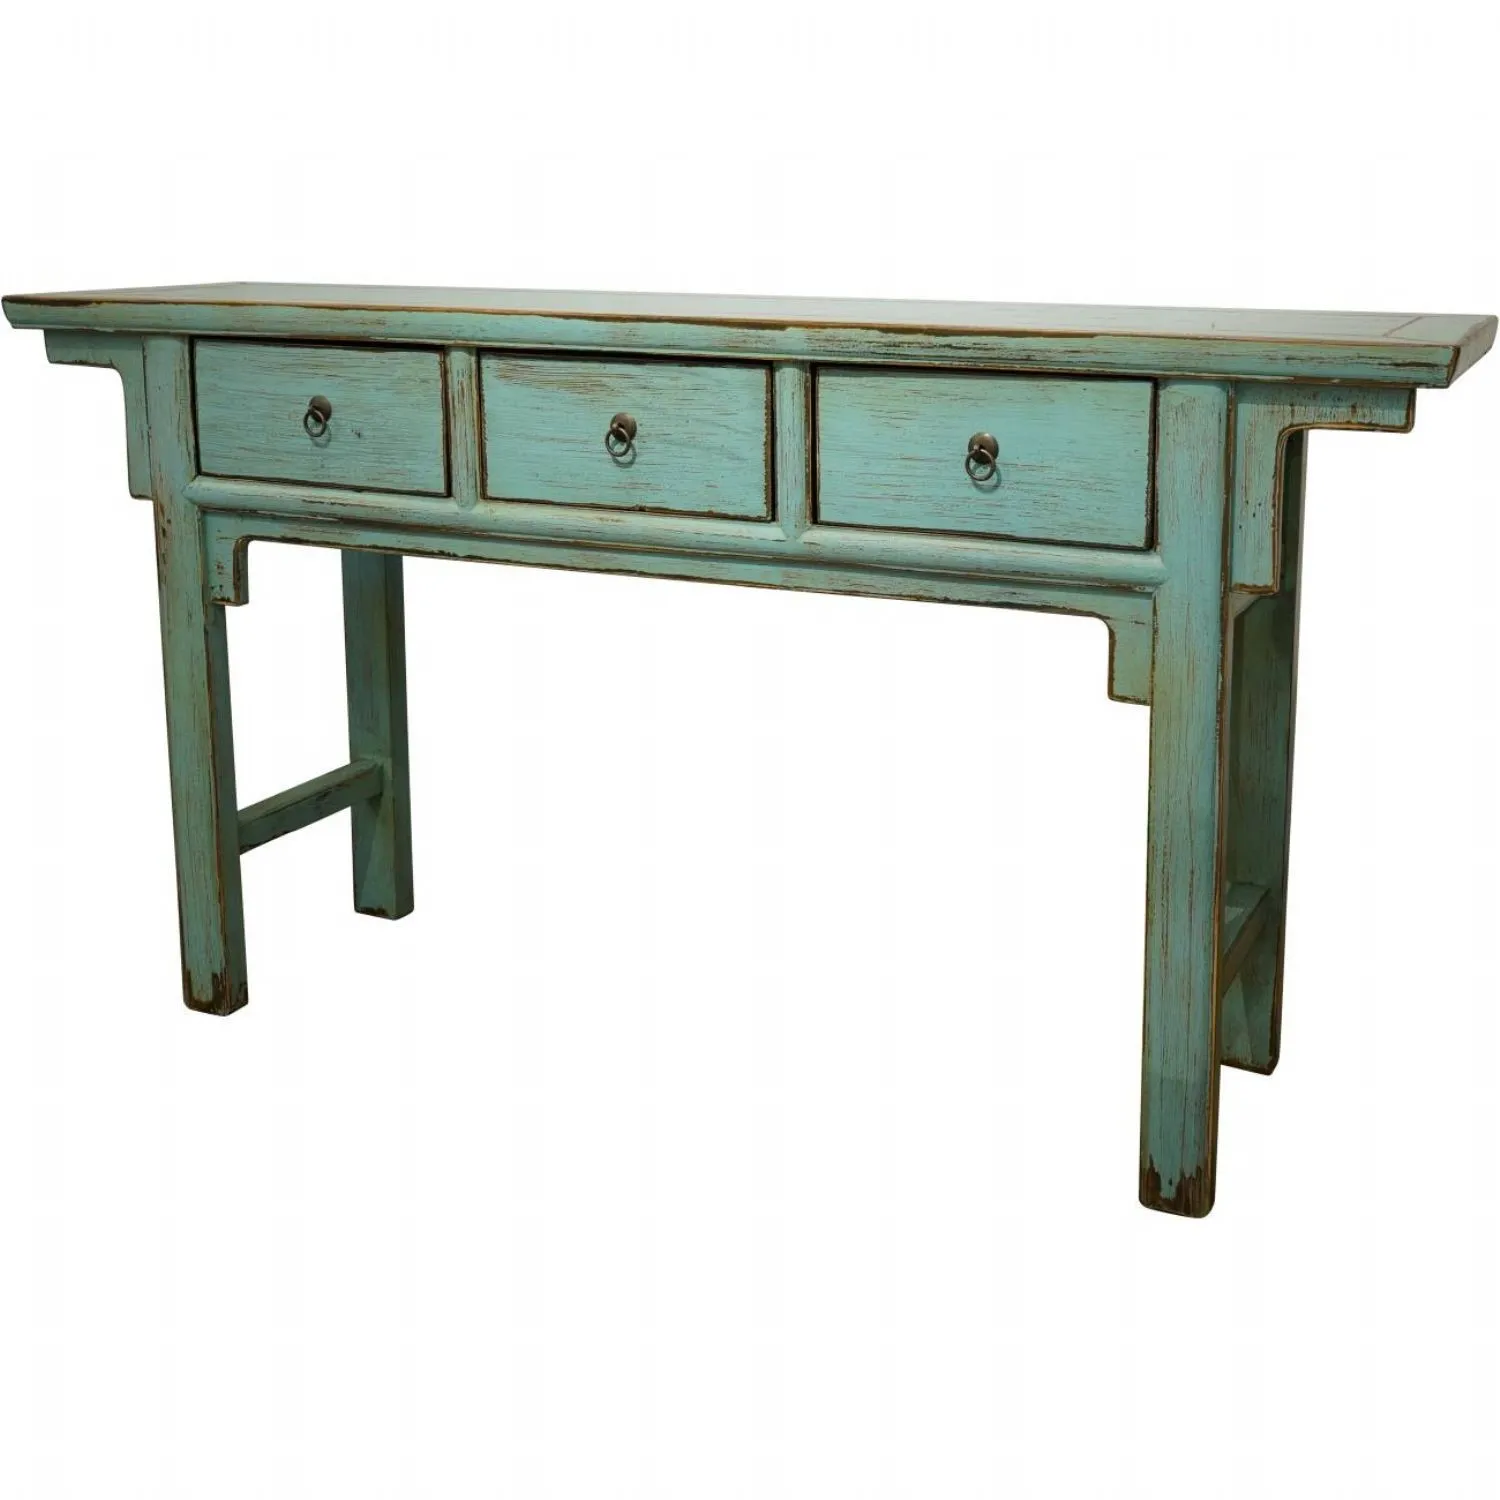 Large Green Painted Wooden Console Table with 3 Drawers